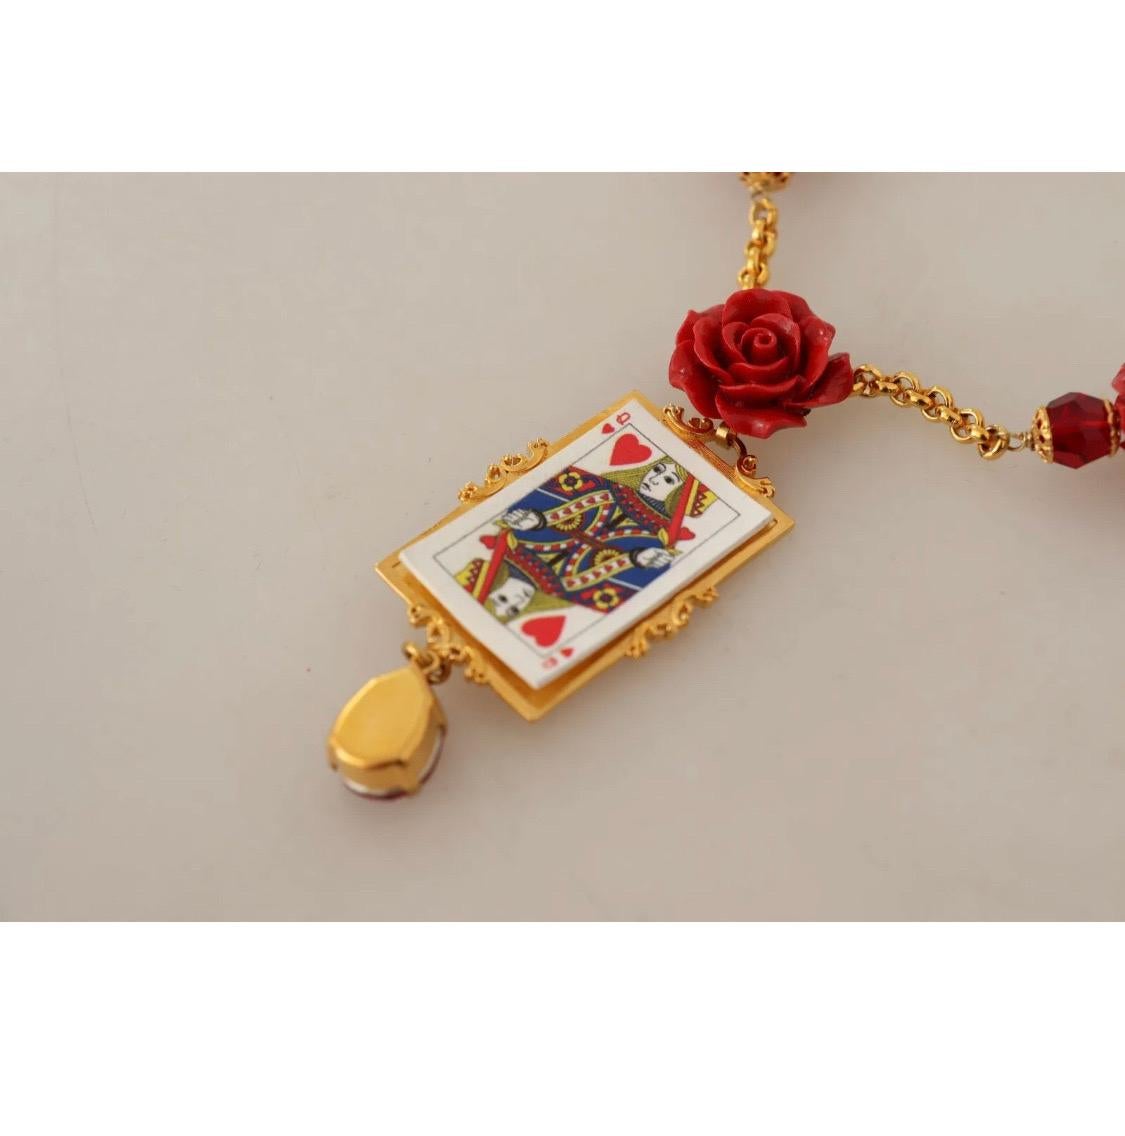 DOLCE & GABBANA

Gorgeous brand new with tags, 100% Authentic Dolce & Gabbana Gold tone necklace with Resin Flower Card Deck Crystal Pendant.

Model: Charm necklace
Material: 50% Brass, 20% Crystals, 20% Resin, 10% Acetate
Color: Gold
Crystal: